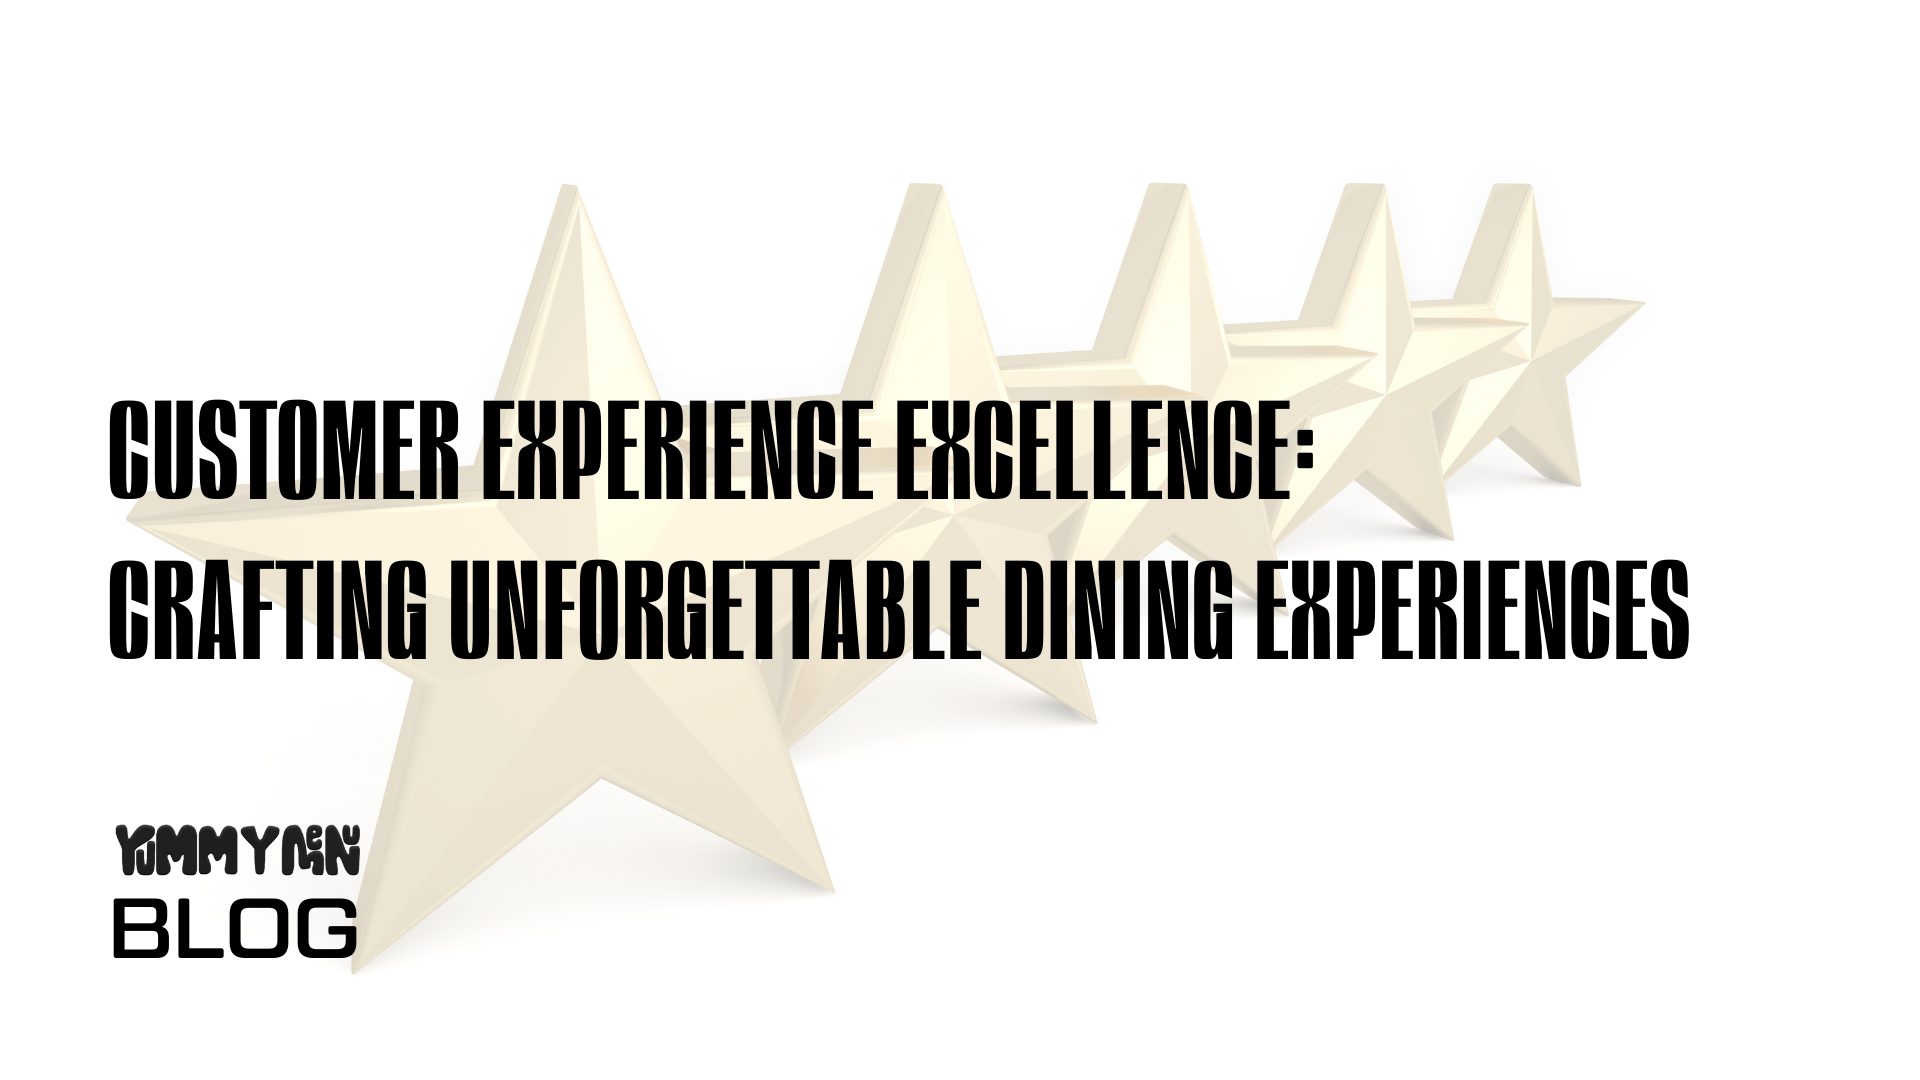 Customer Experience Excellence: Crafting Unforgettable Dining Experiences